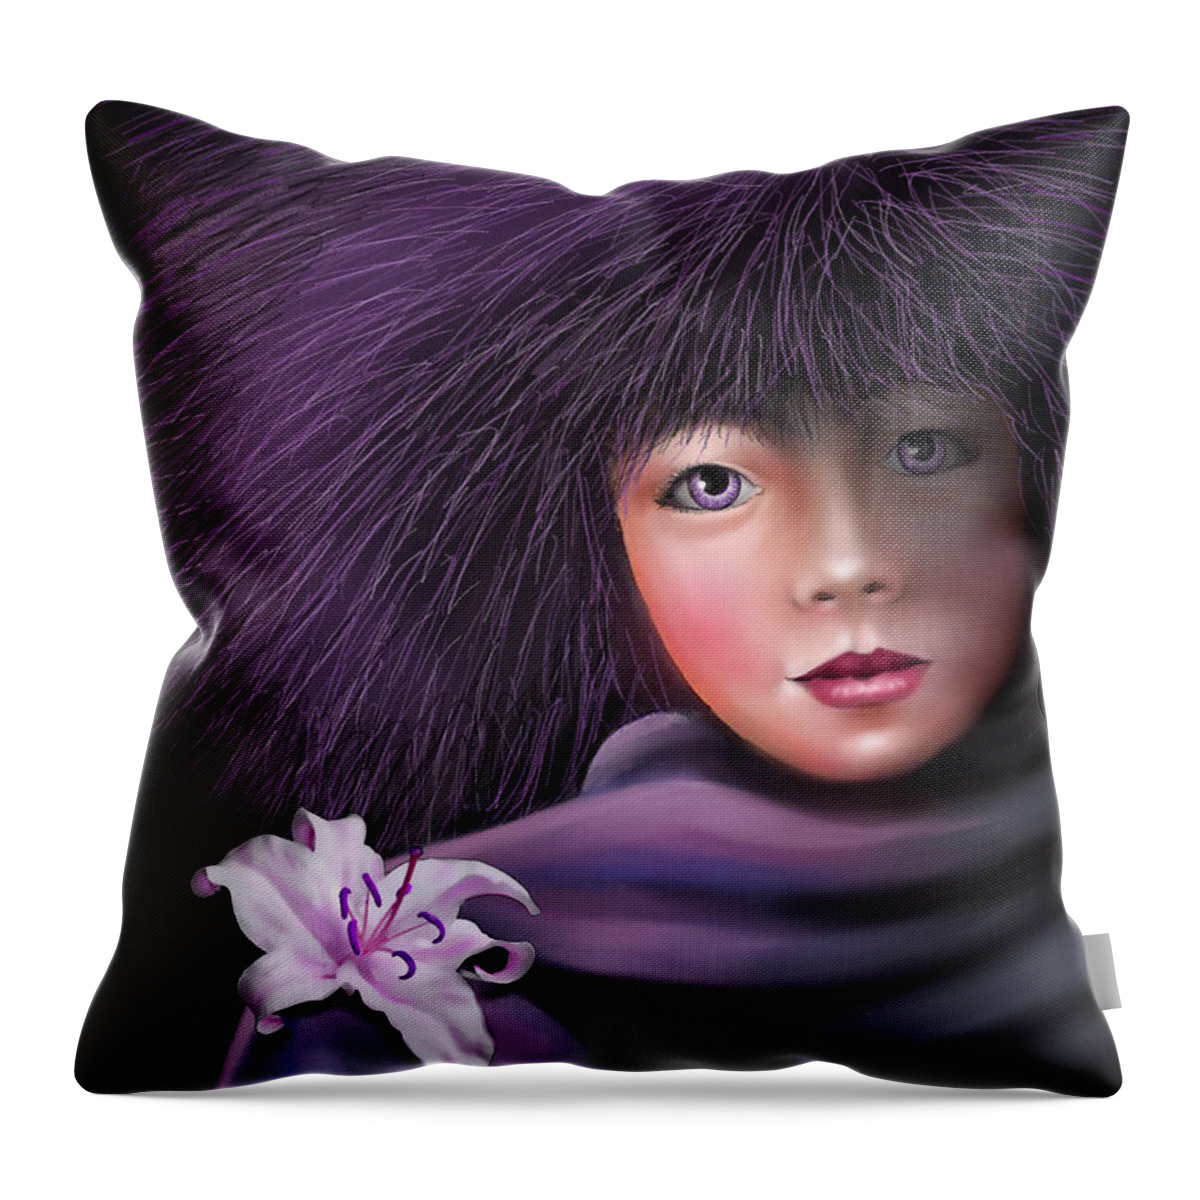 Beautiful Throw Pillow featuring the painting Purple Delight by Artificium -